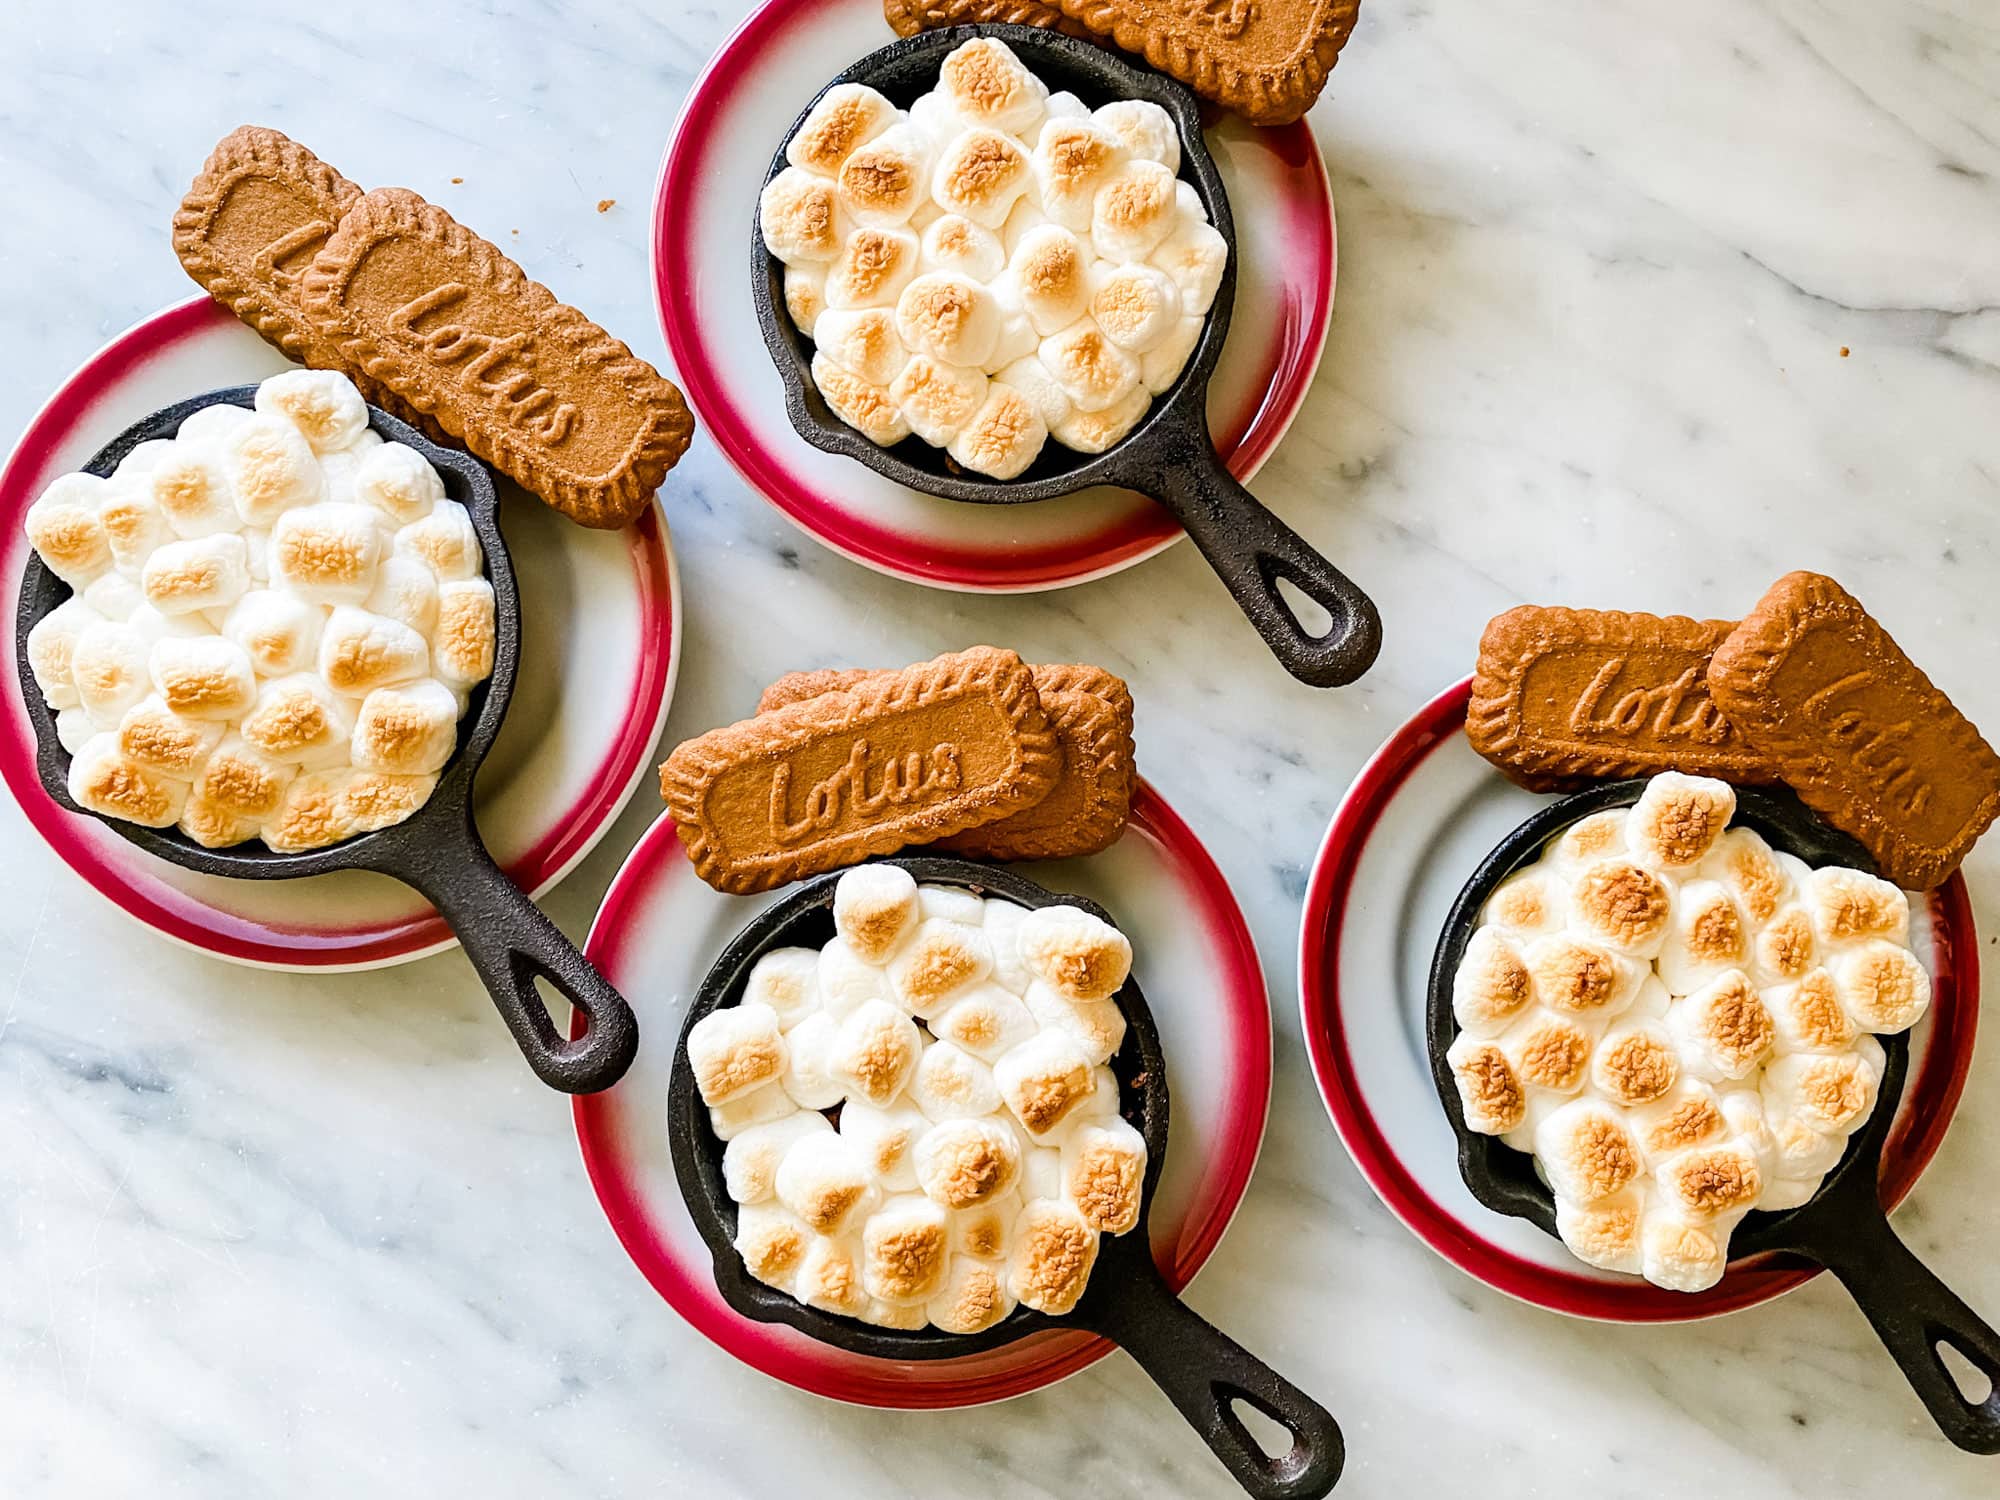 https://mostlovelythings.com/wp-content/uploads/2022/06/individual-smores-with-biscoff-cookies.jpg